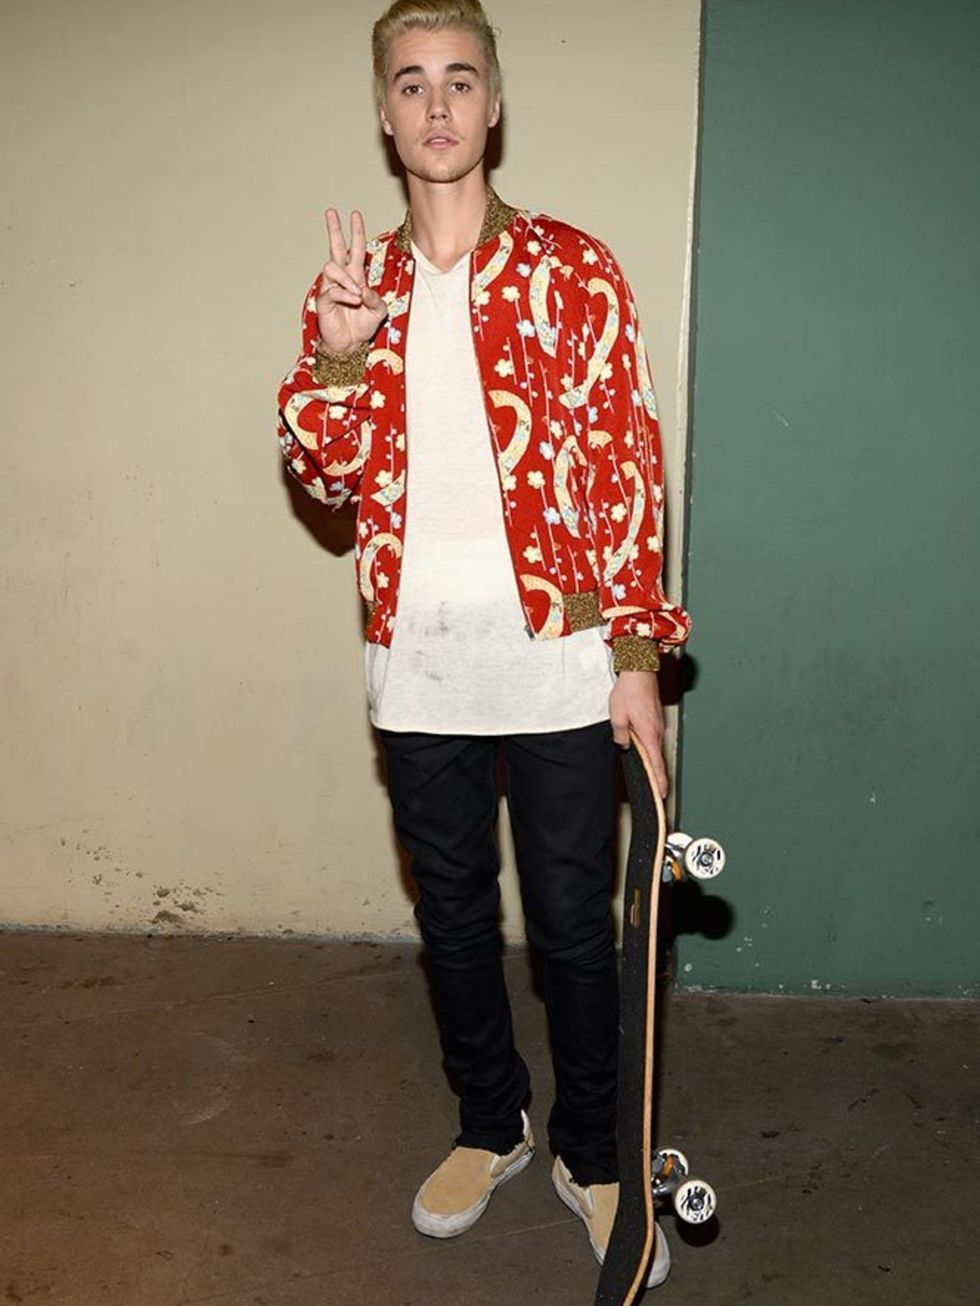 Justin Bieber attends the Saint Laurent at the Palladium show in LA, Februrary 2016.